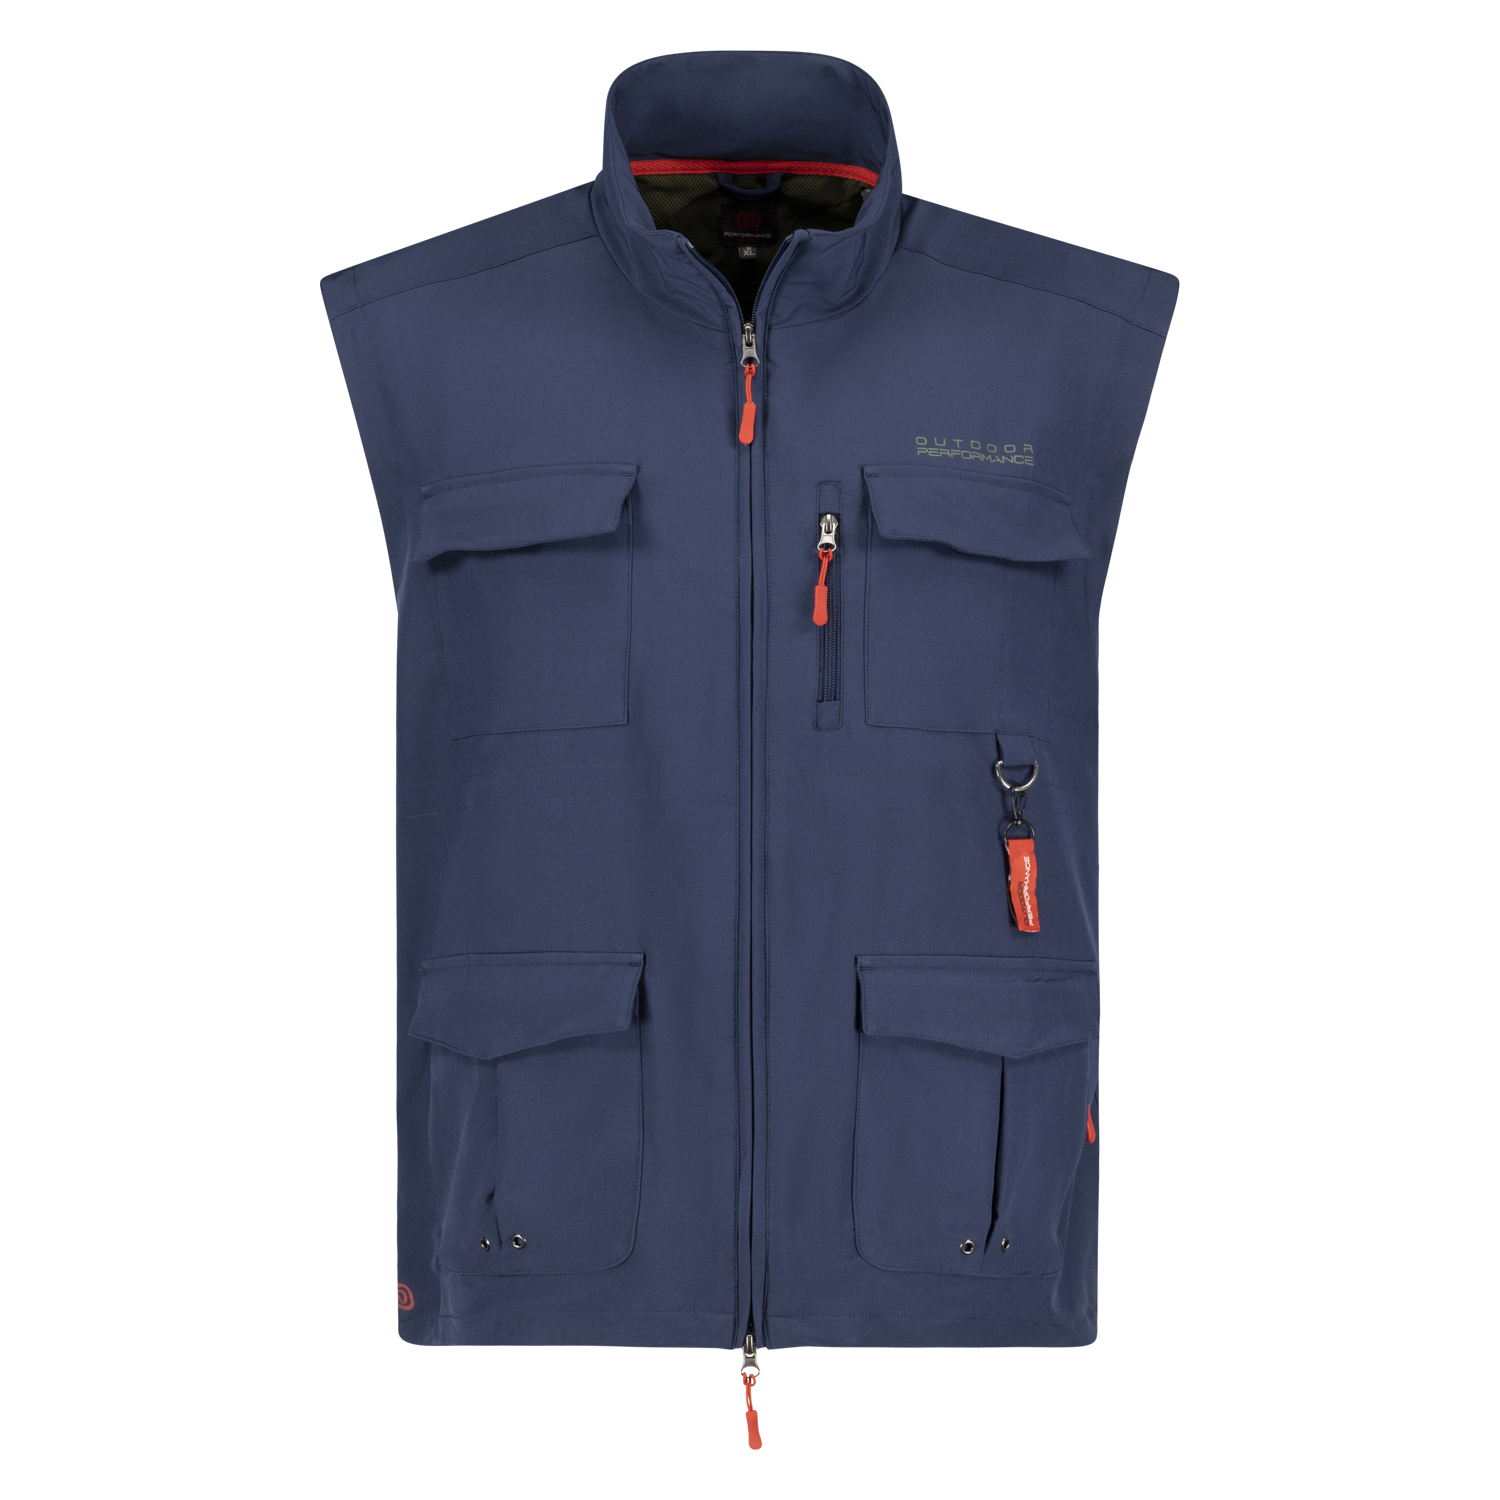 Outdoor vest in navy series Tommy by ADAMO up to oversize 12XL